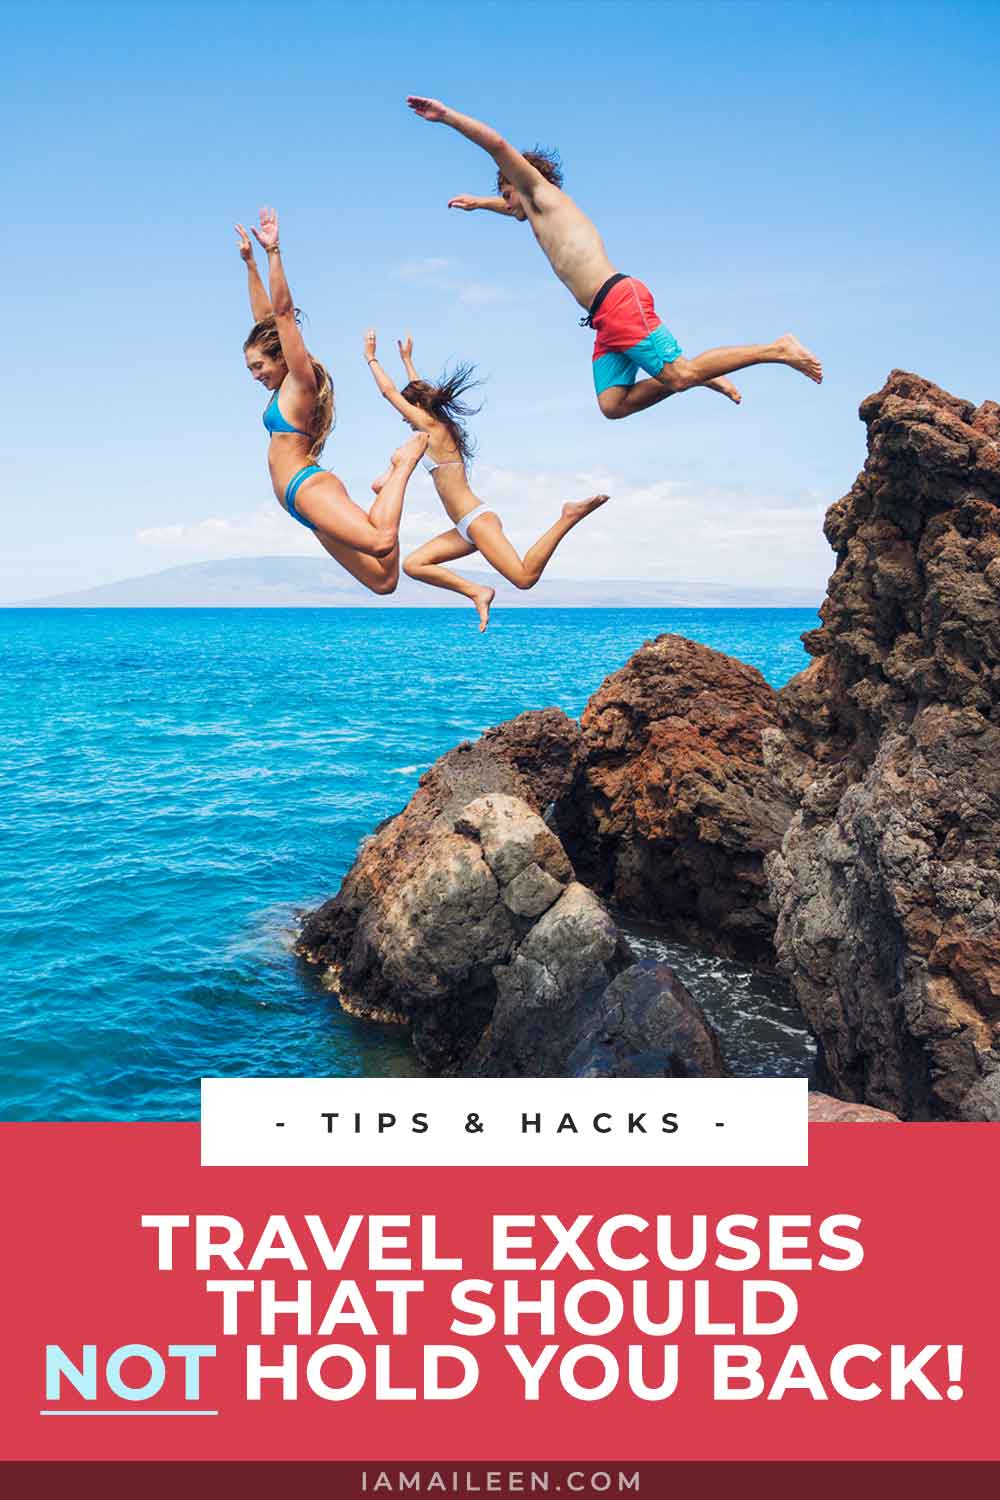 Common Travel Excuses That Should NOT Hold You Back!